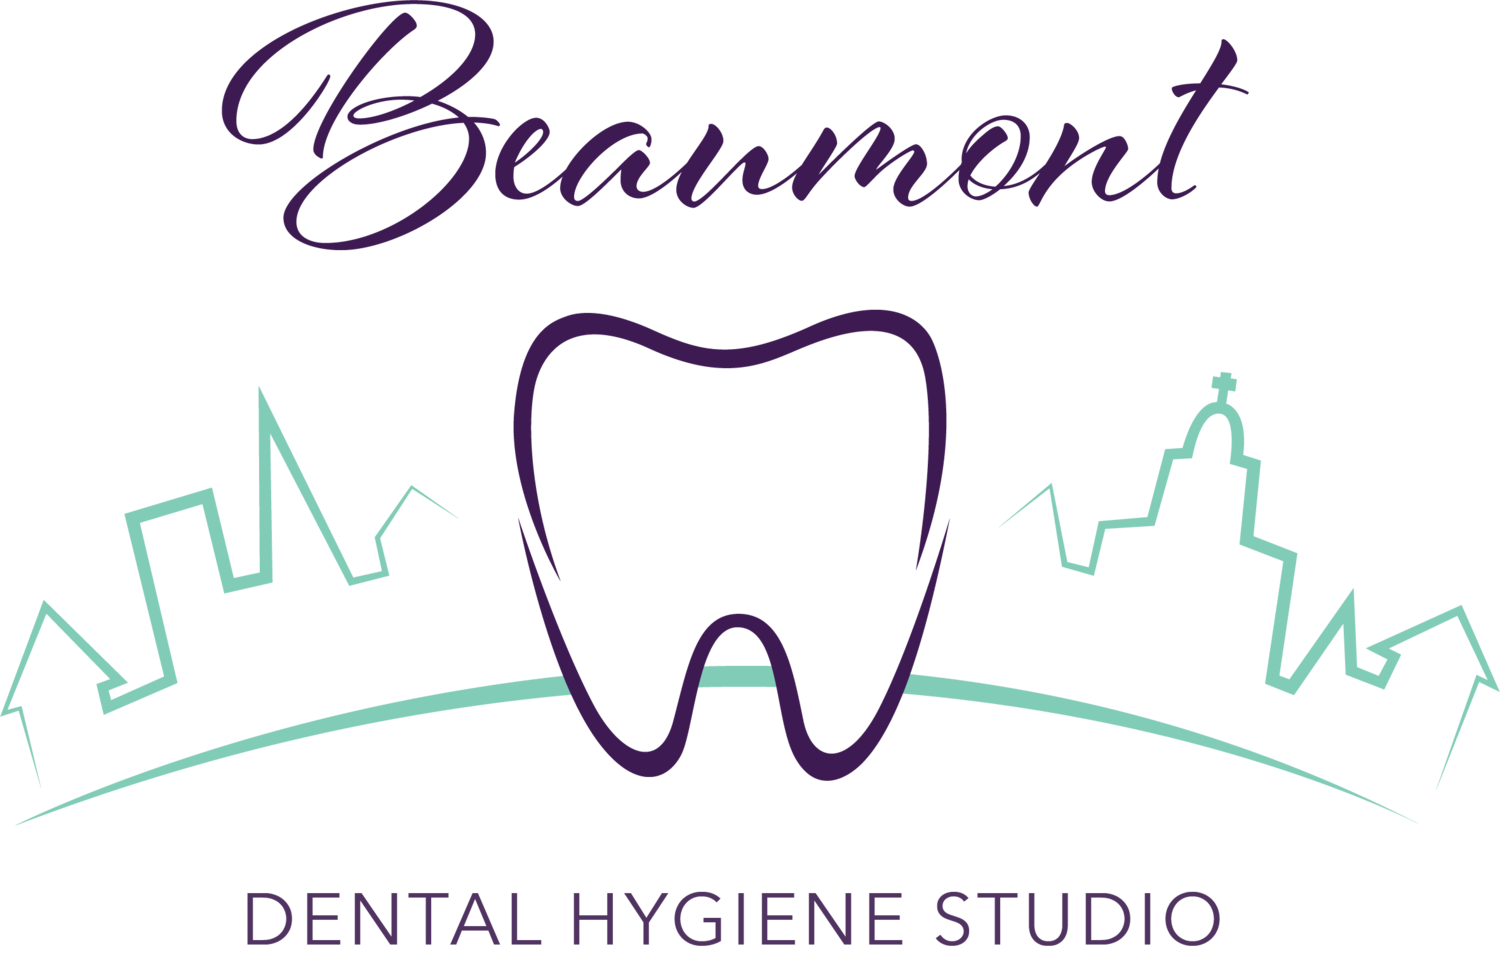 BDHS - more than just a teeth cleaning